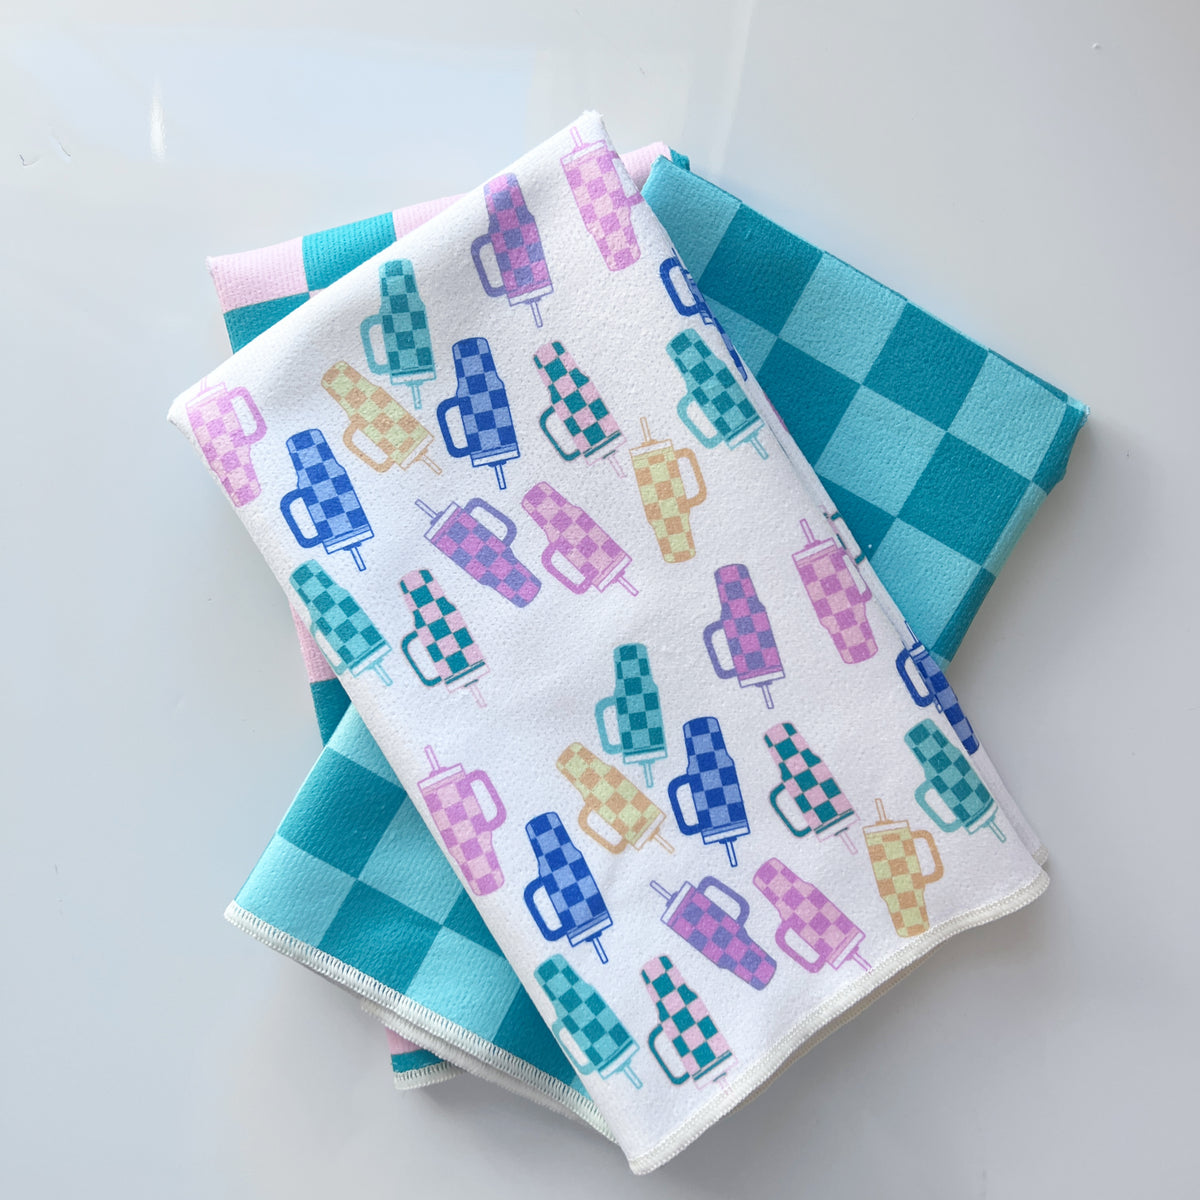 The Cup Check Printed Towel